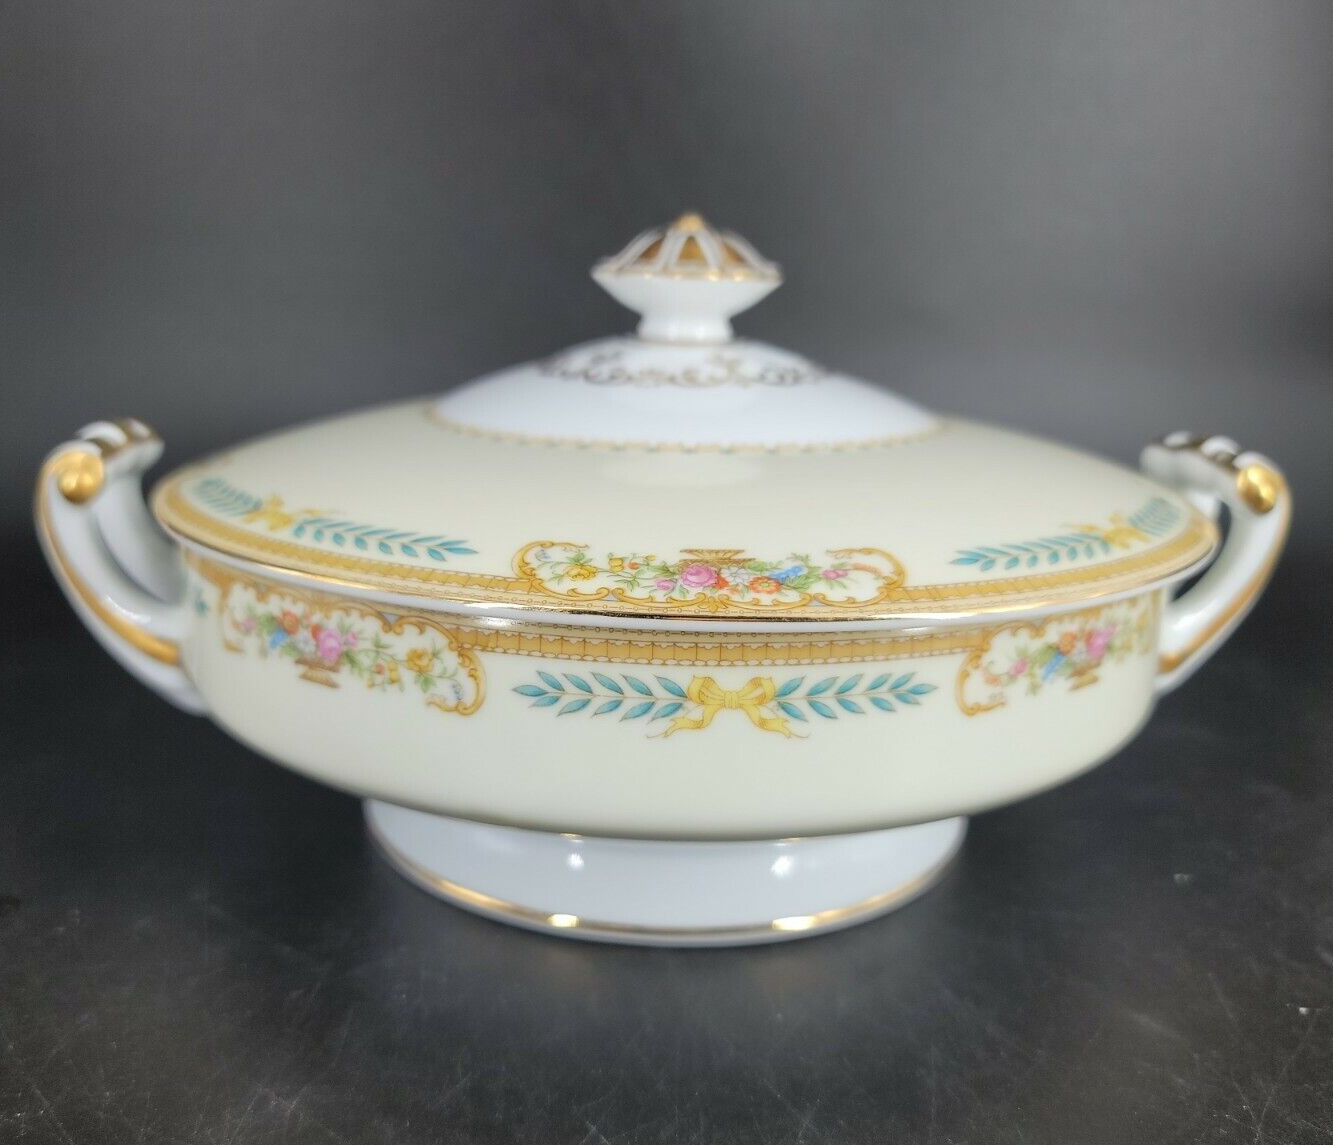 Vintage Noritake China Vegetable Bowl Casserole Round Soup Tureen with lid 3812